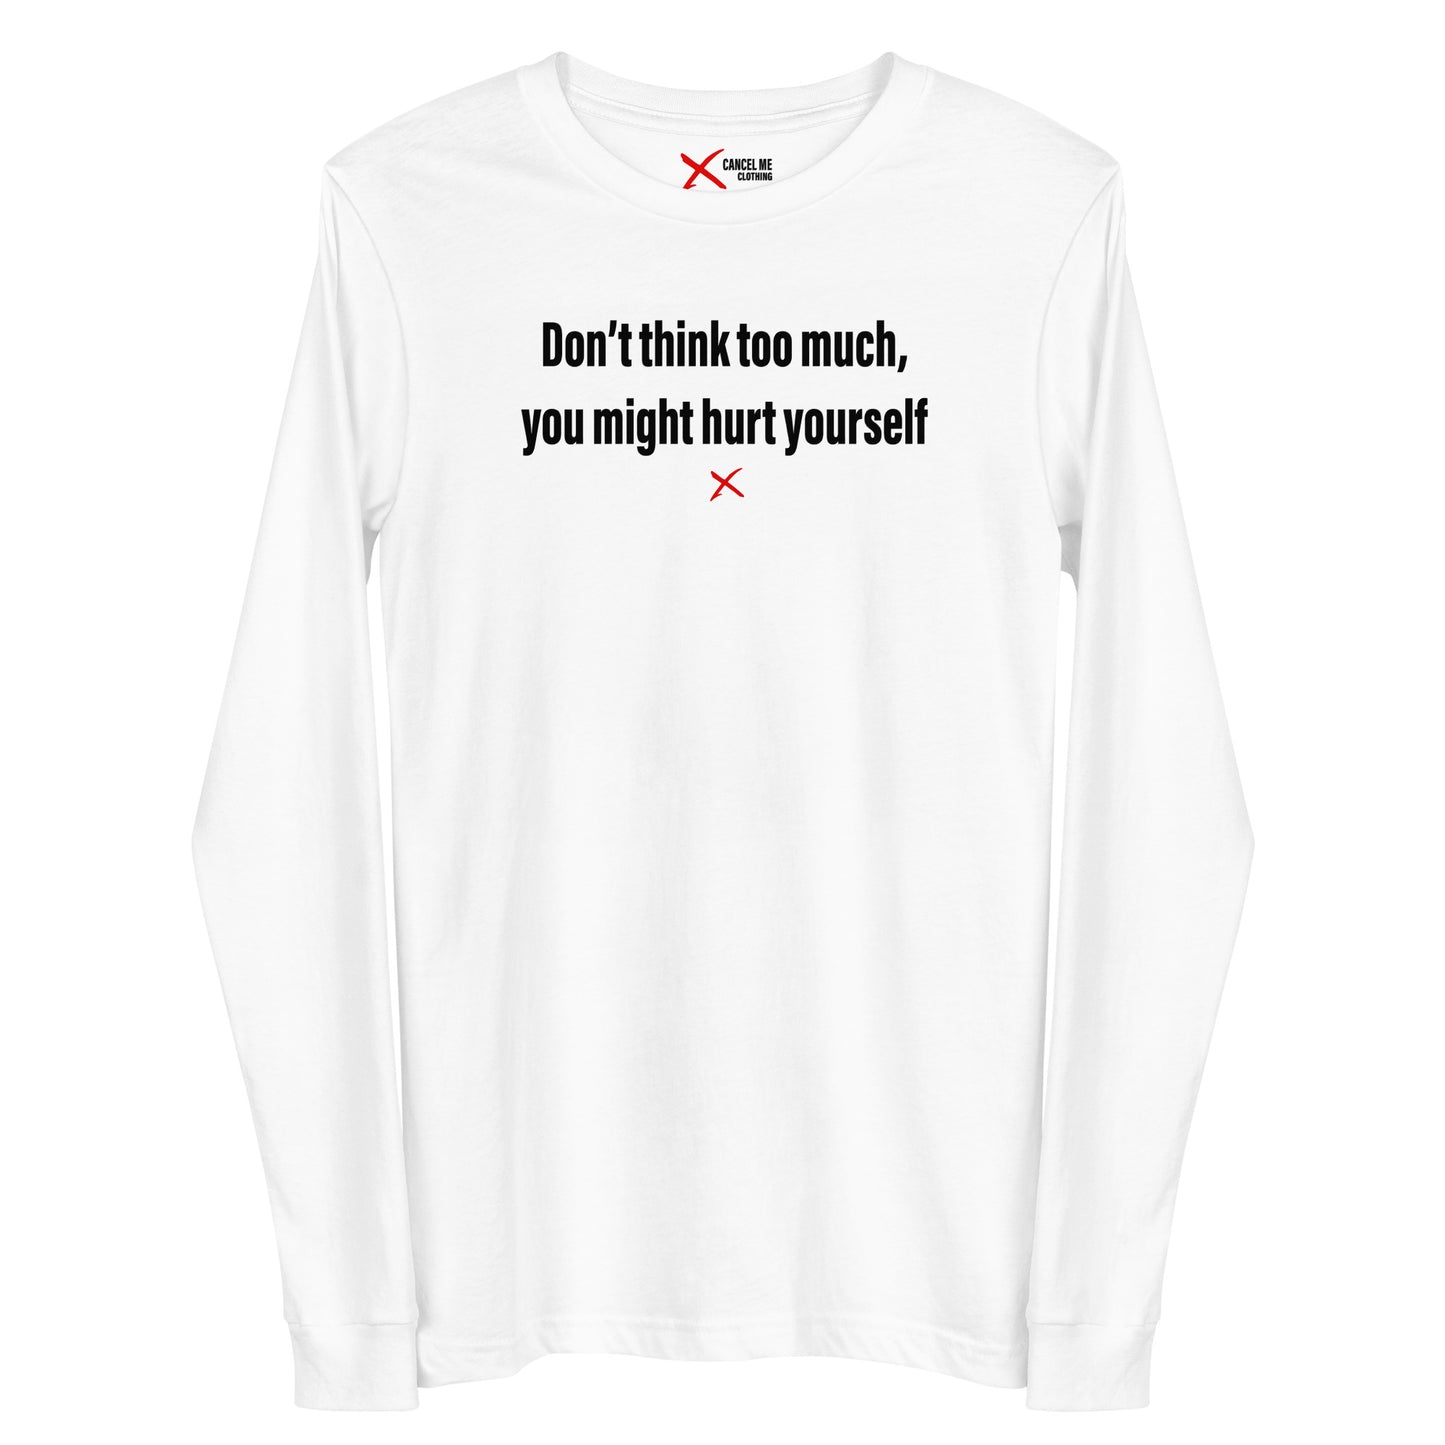 Don't think too much, you might hurt yourself - Longsleeve